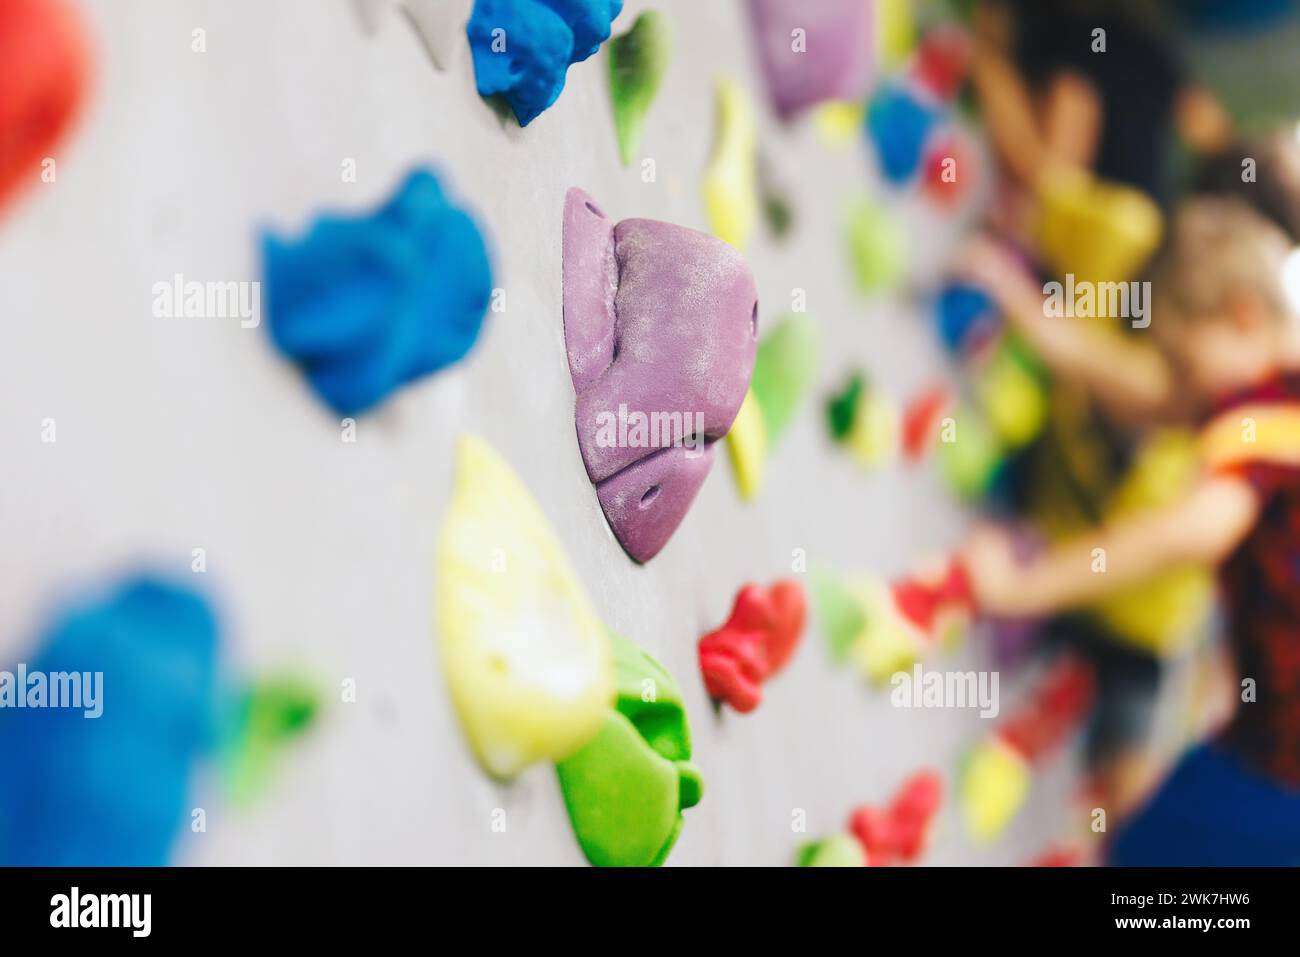 Bouldering Climbing Wall Holds Kids Playing in Background. Indoor Climbing Equipment Stock Photo